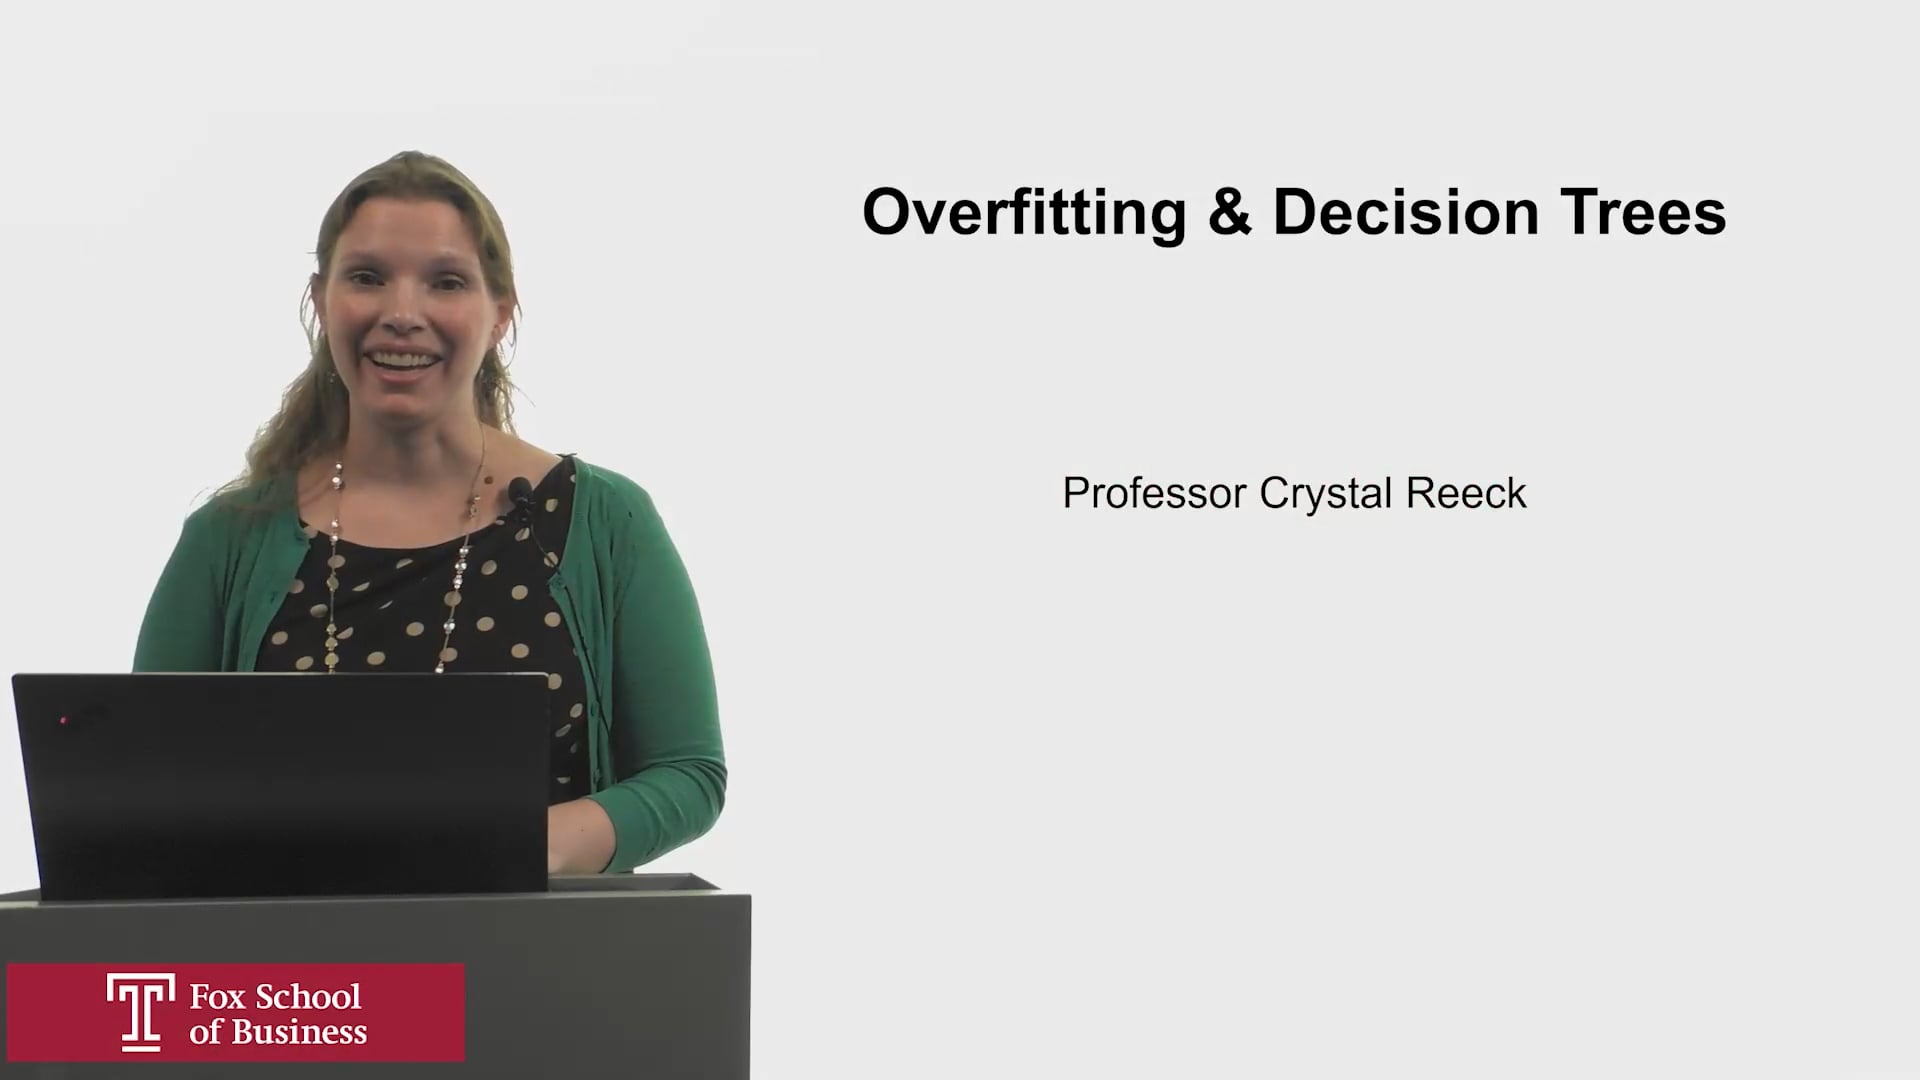 Overfitting & Decision Trees